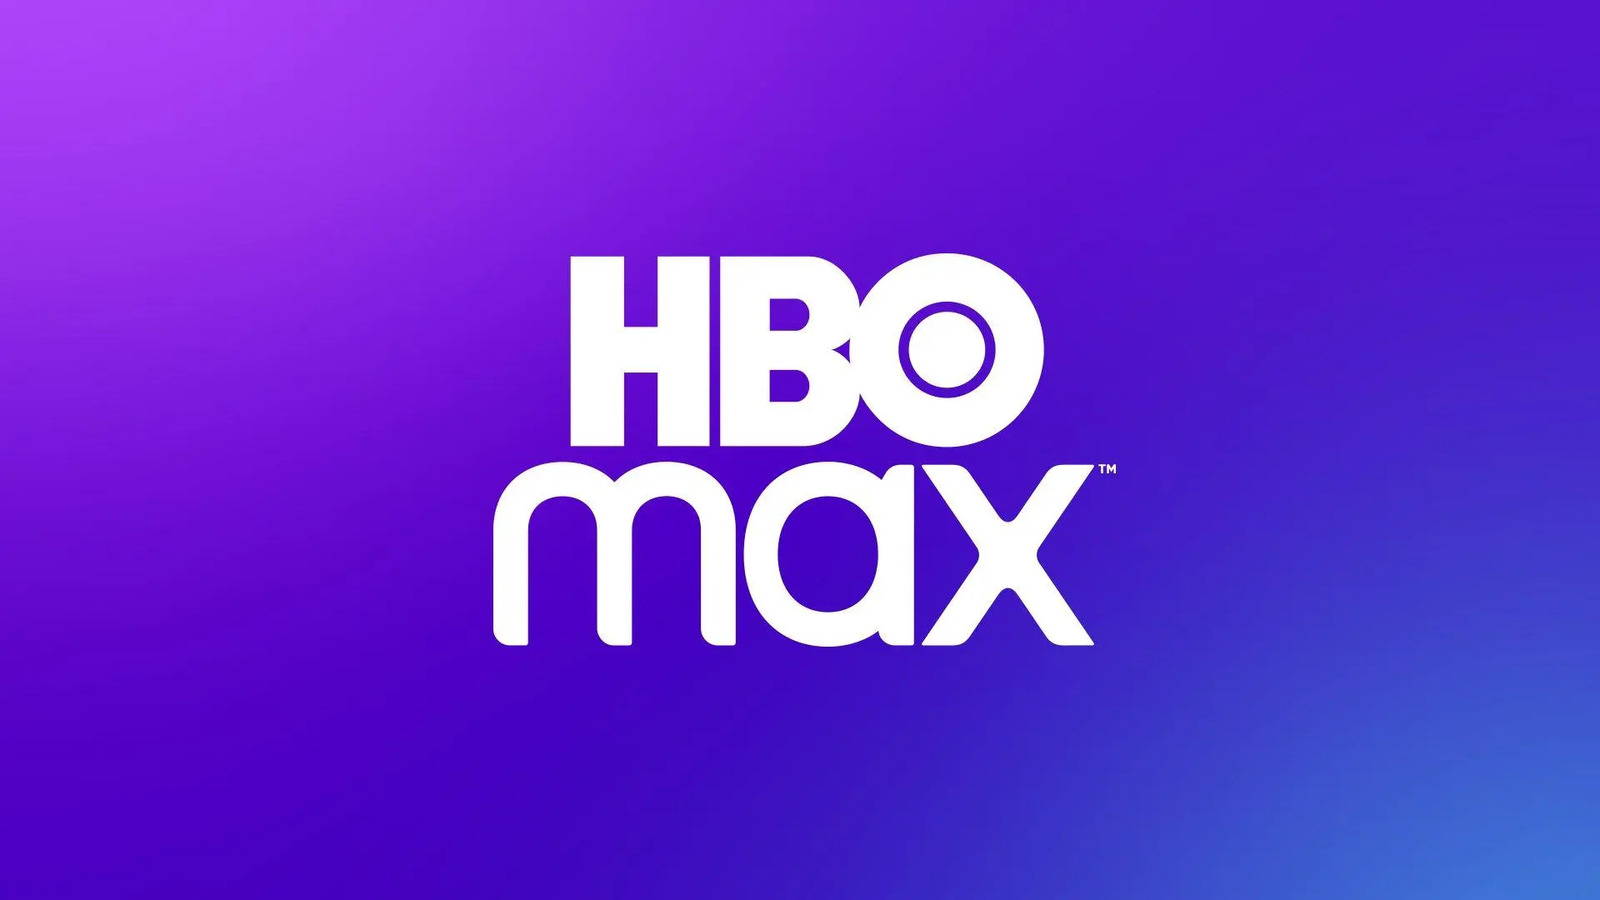 HBO Max and Discovery+ will officially merge into a single streaming service in 2023